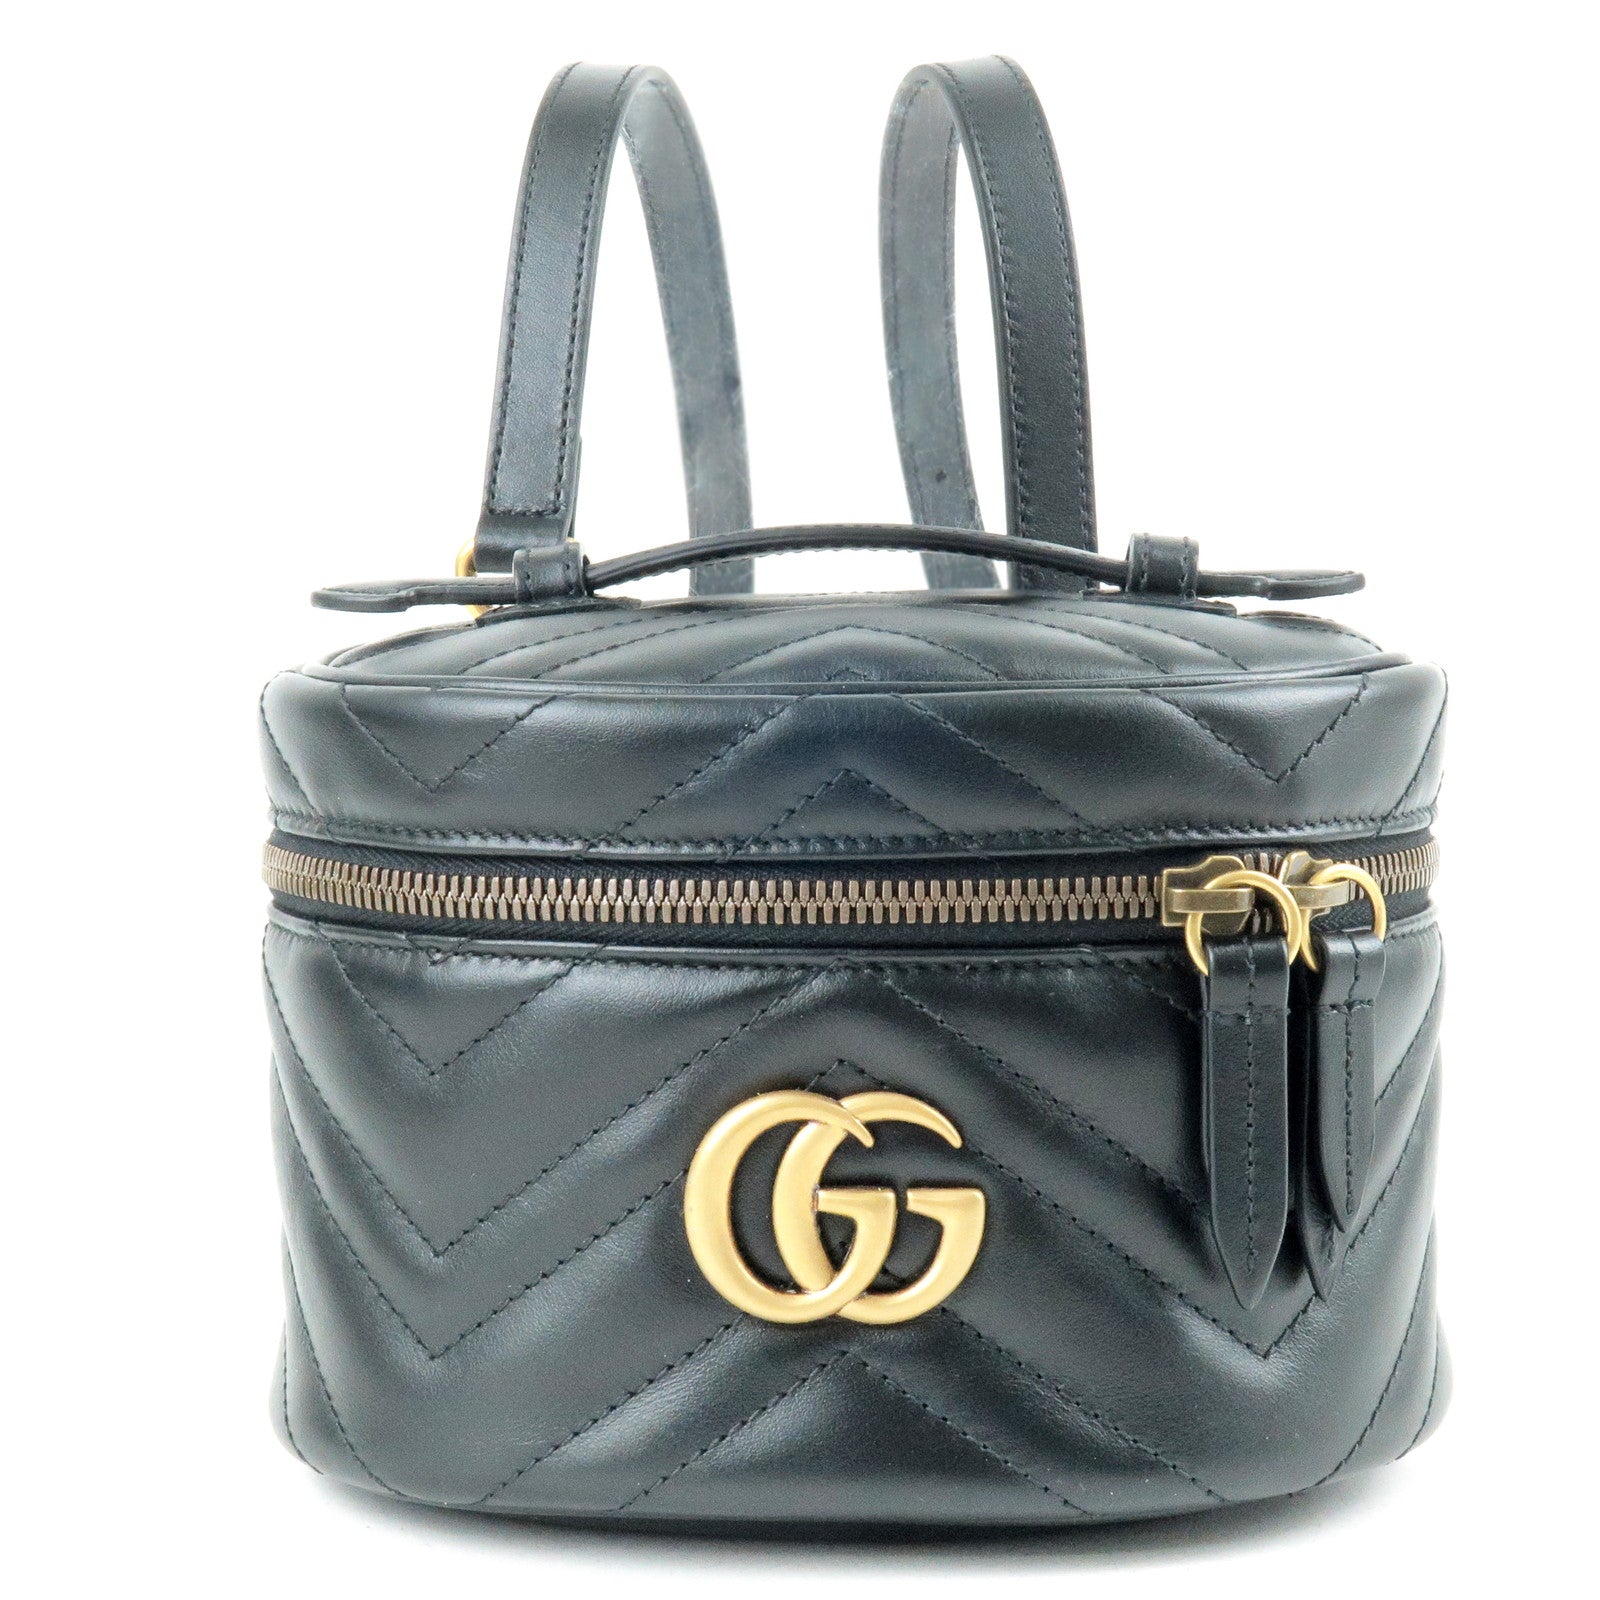 GUCCI-GG-Marmont-Leather-Back-Pack-Ruck-Sack-Black-598594